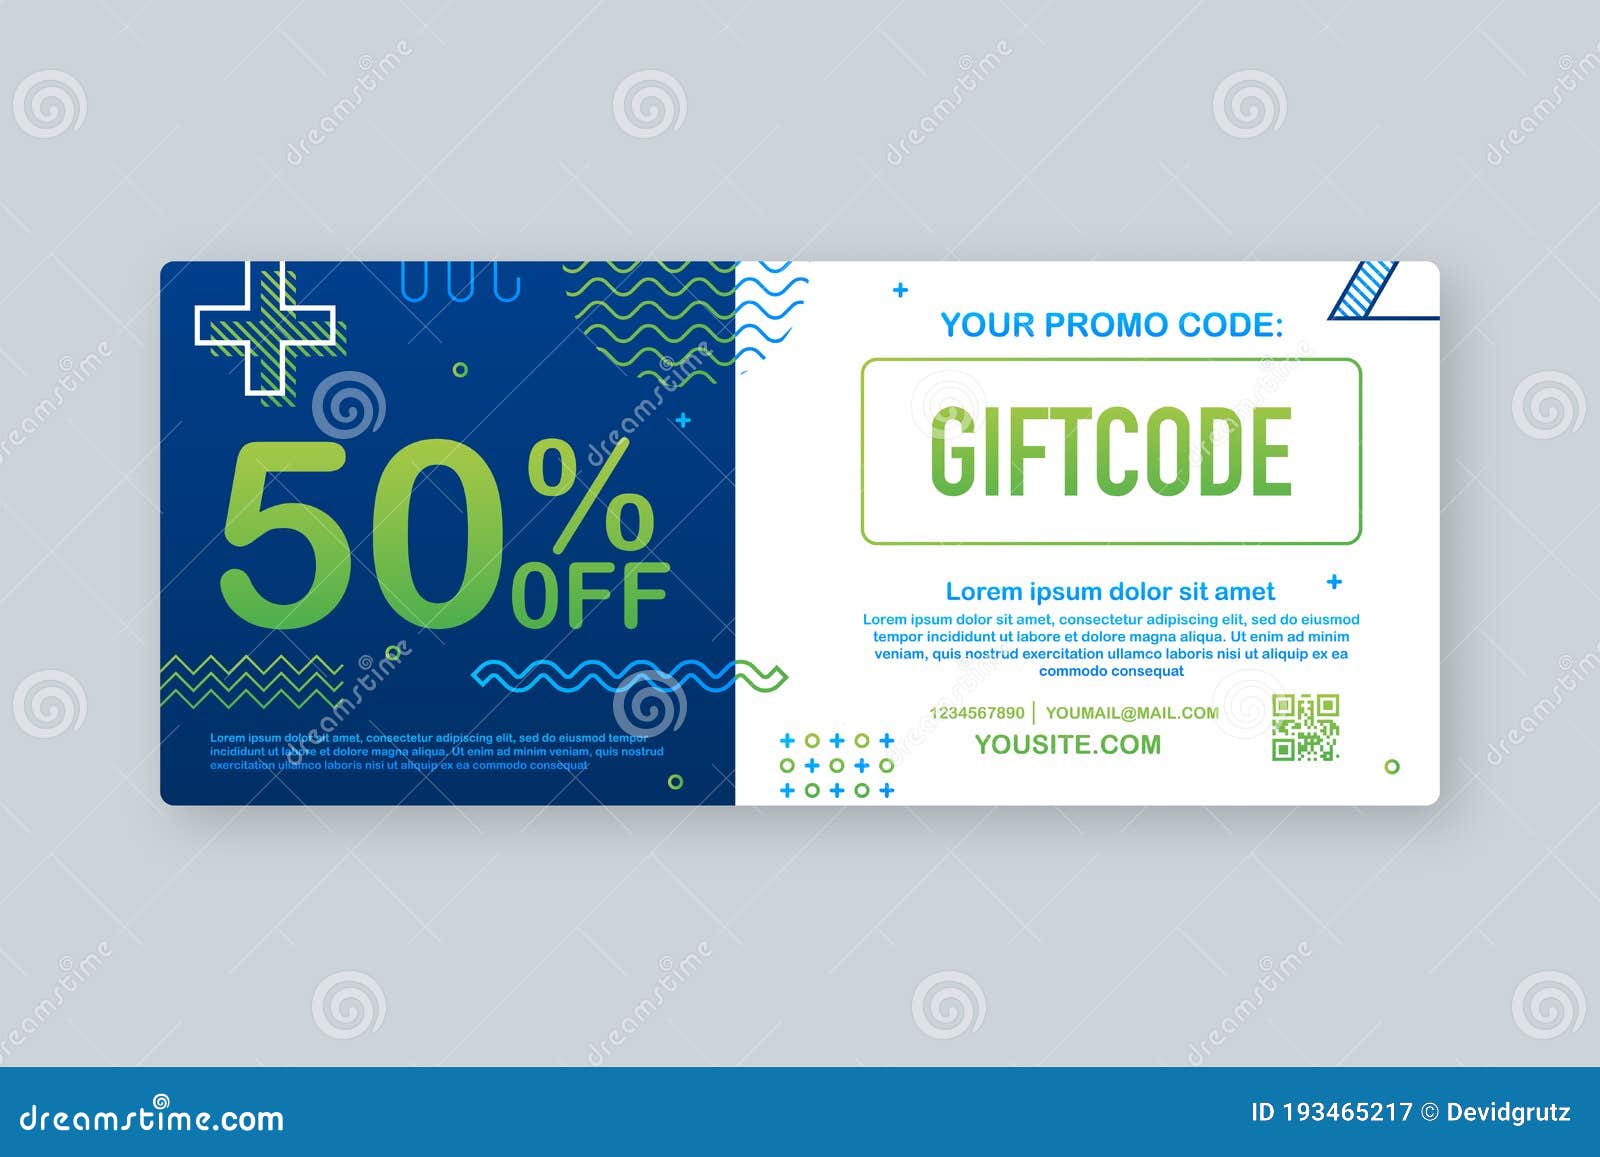 What Is A Coupon Code?